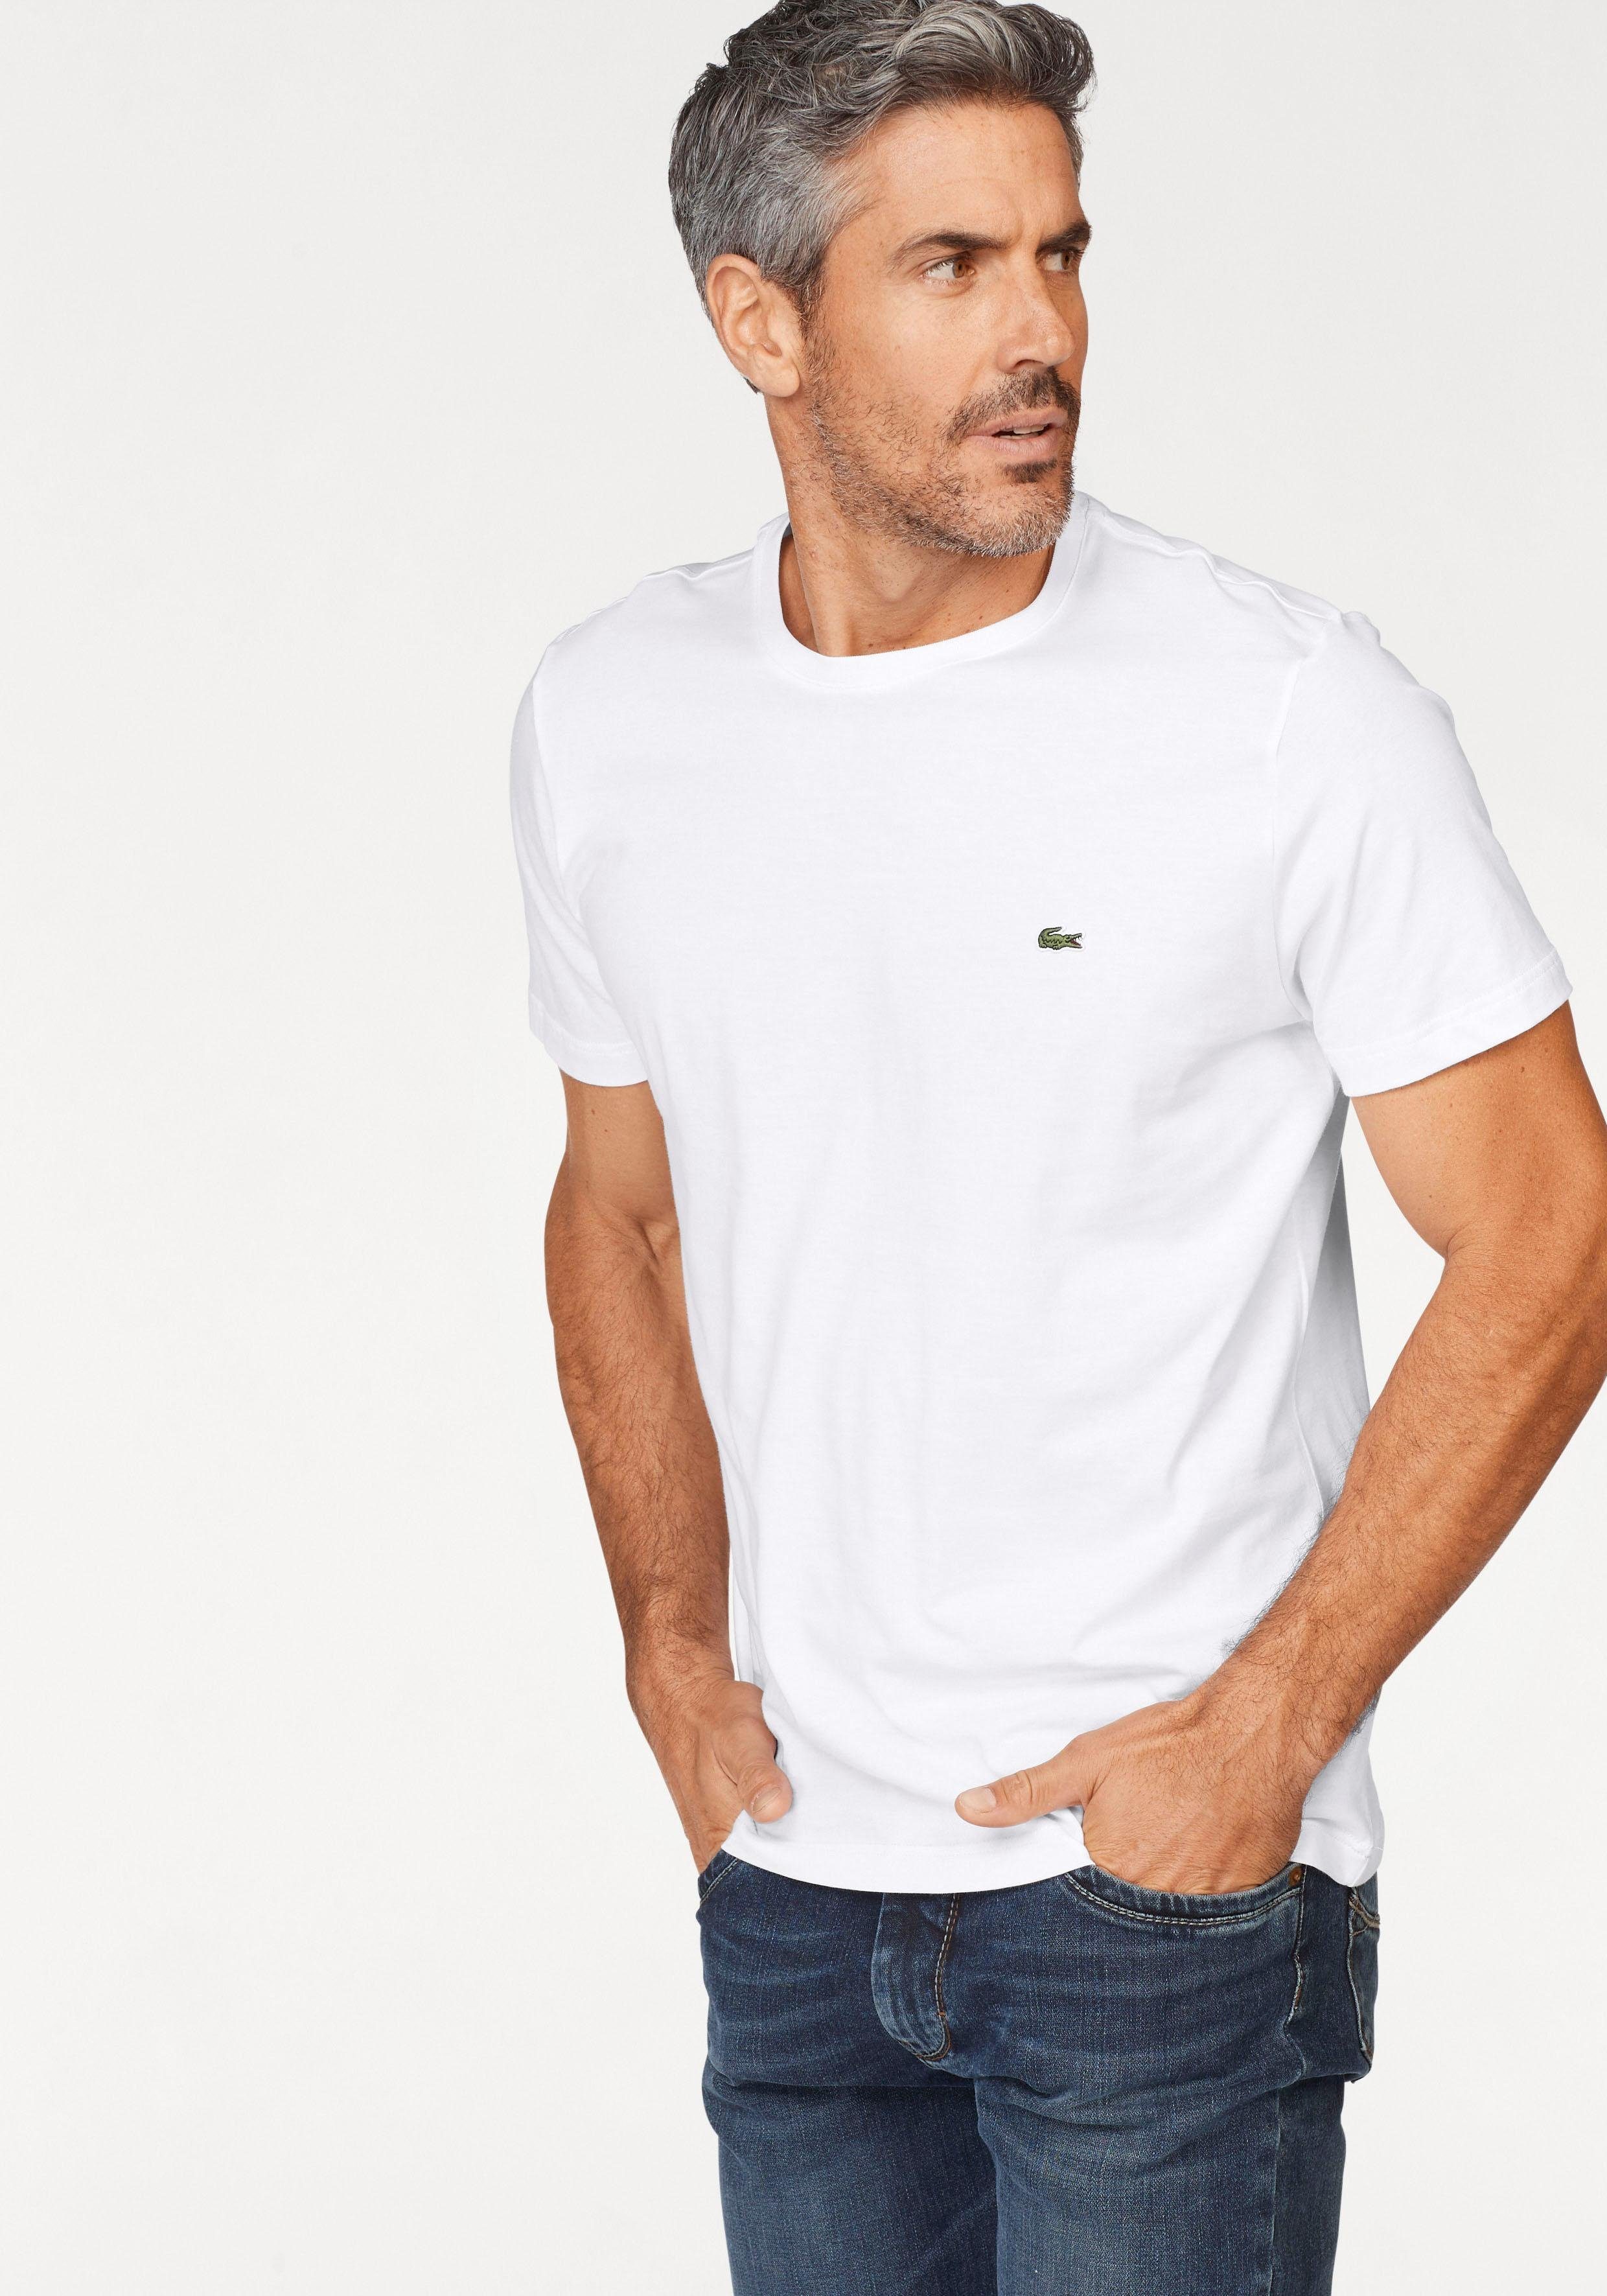 Lacoste Classic T-Shirt White